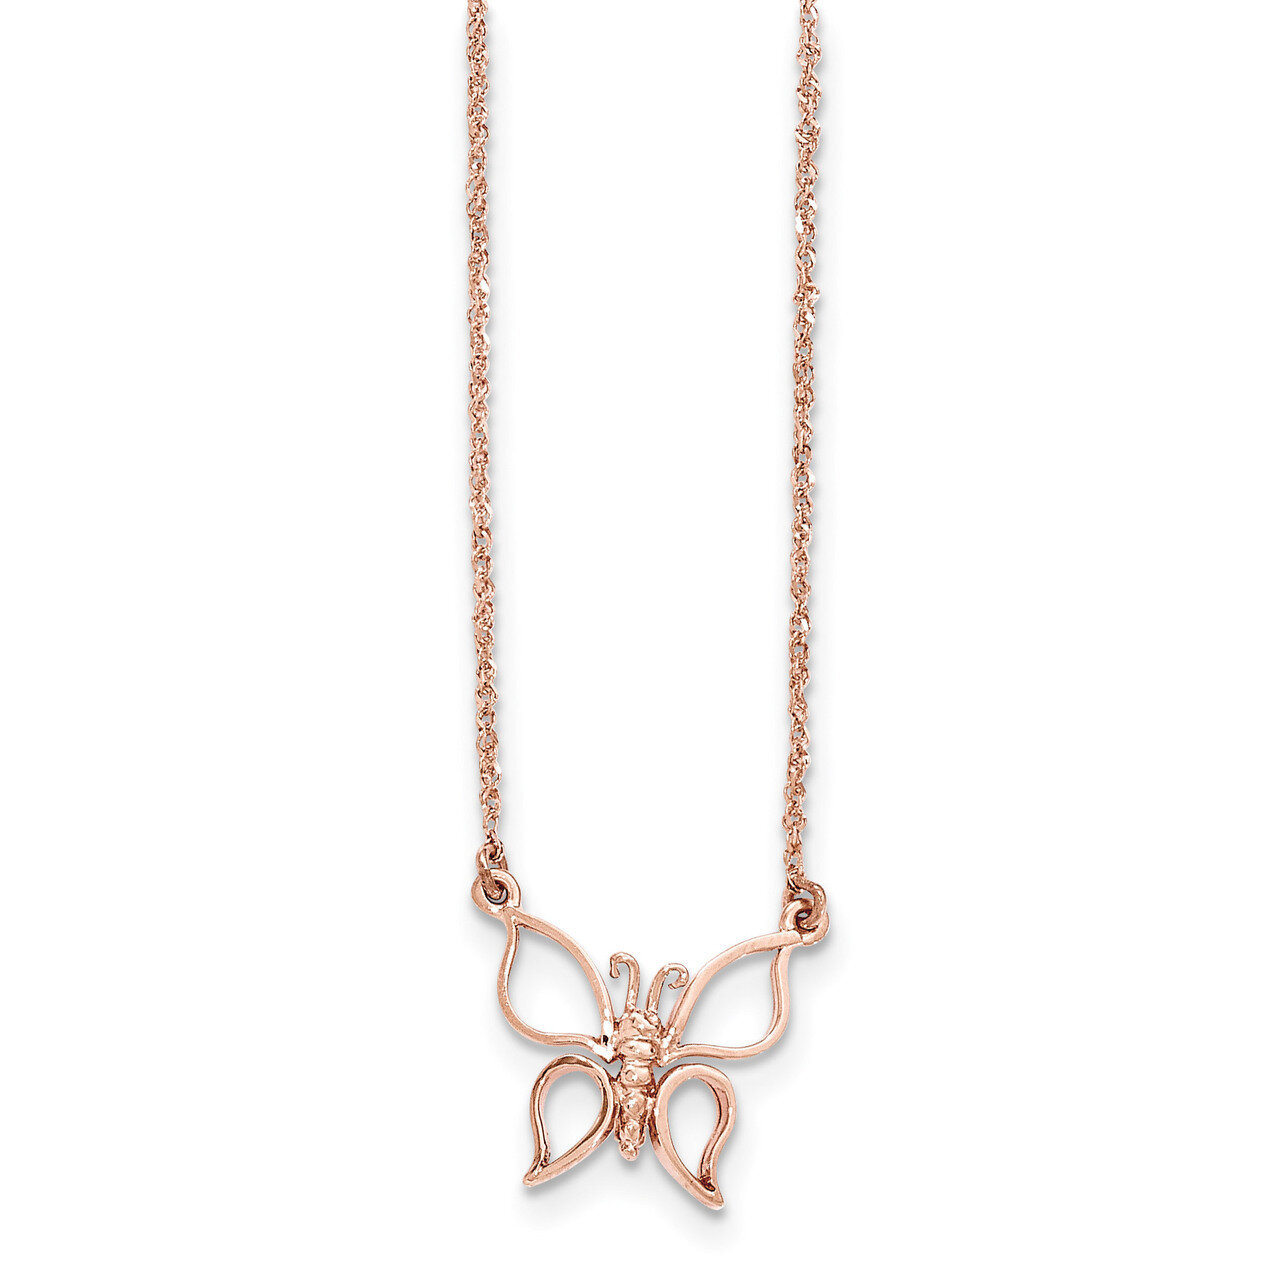 17 Inch Polished Butterfly Necklace 14k Rose Gold SF2273-17